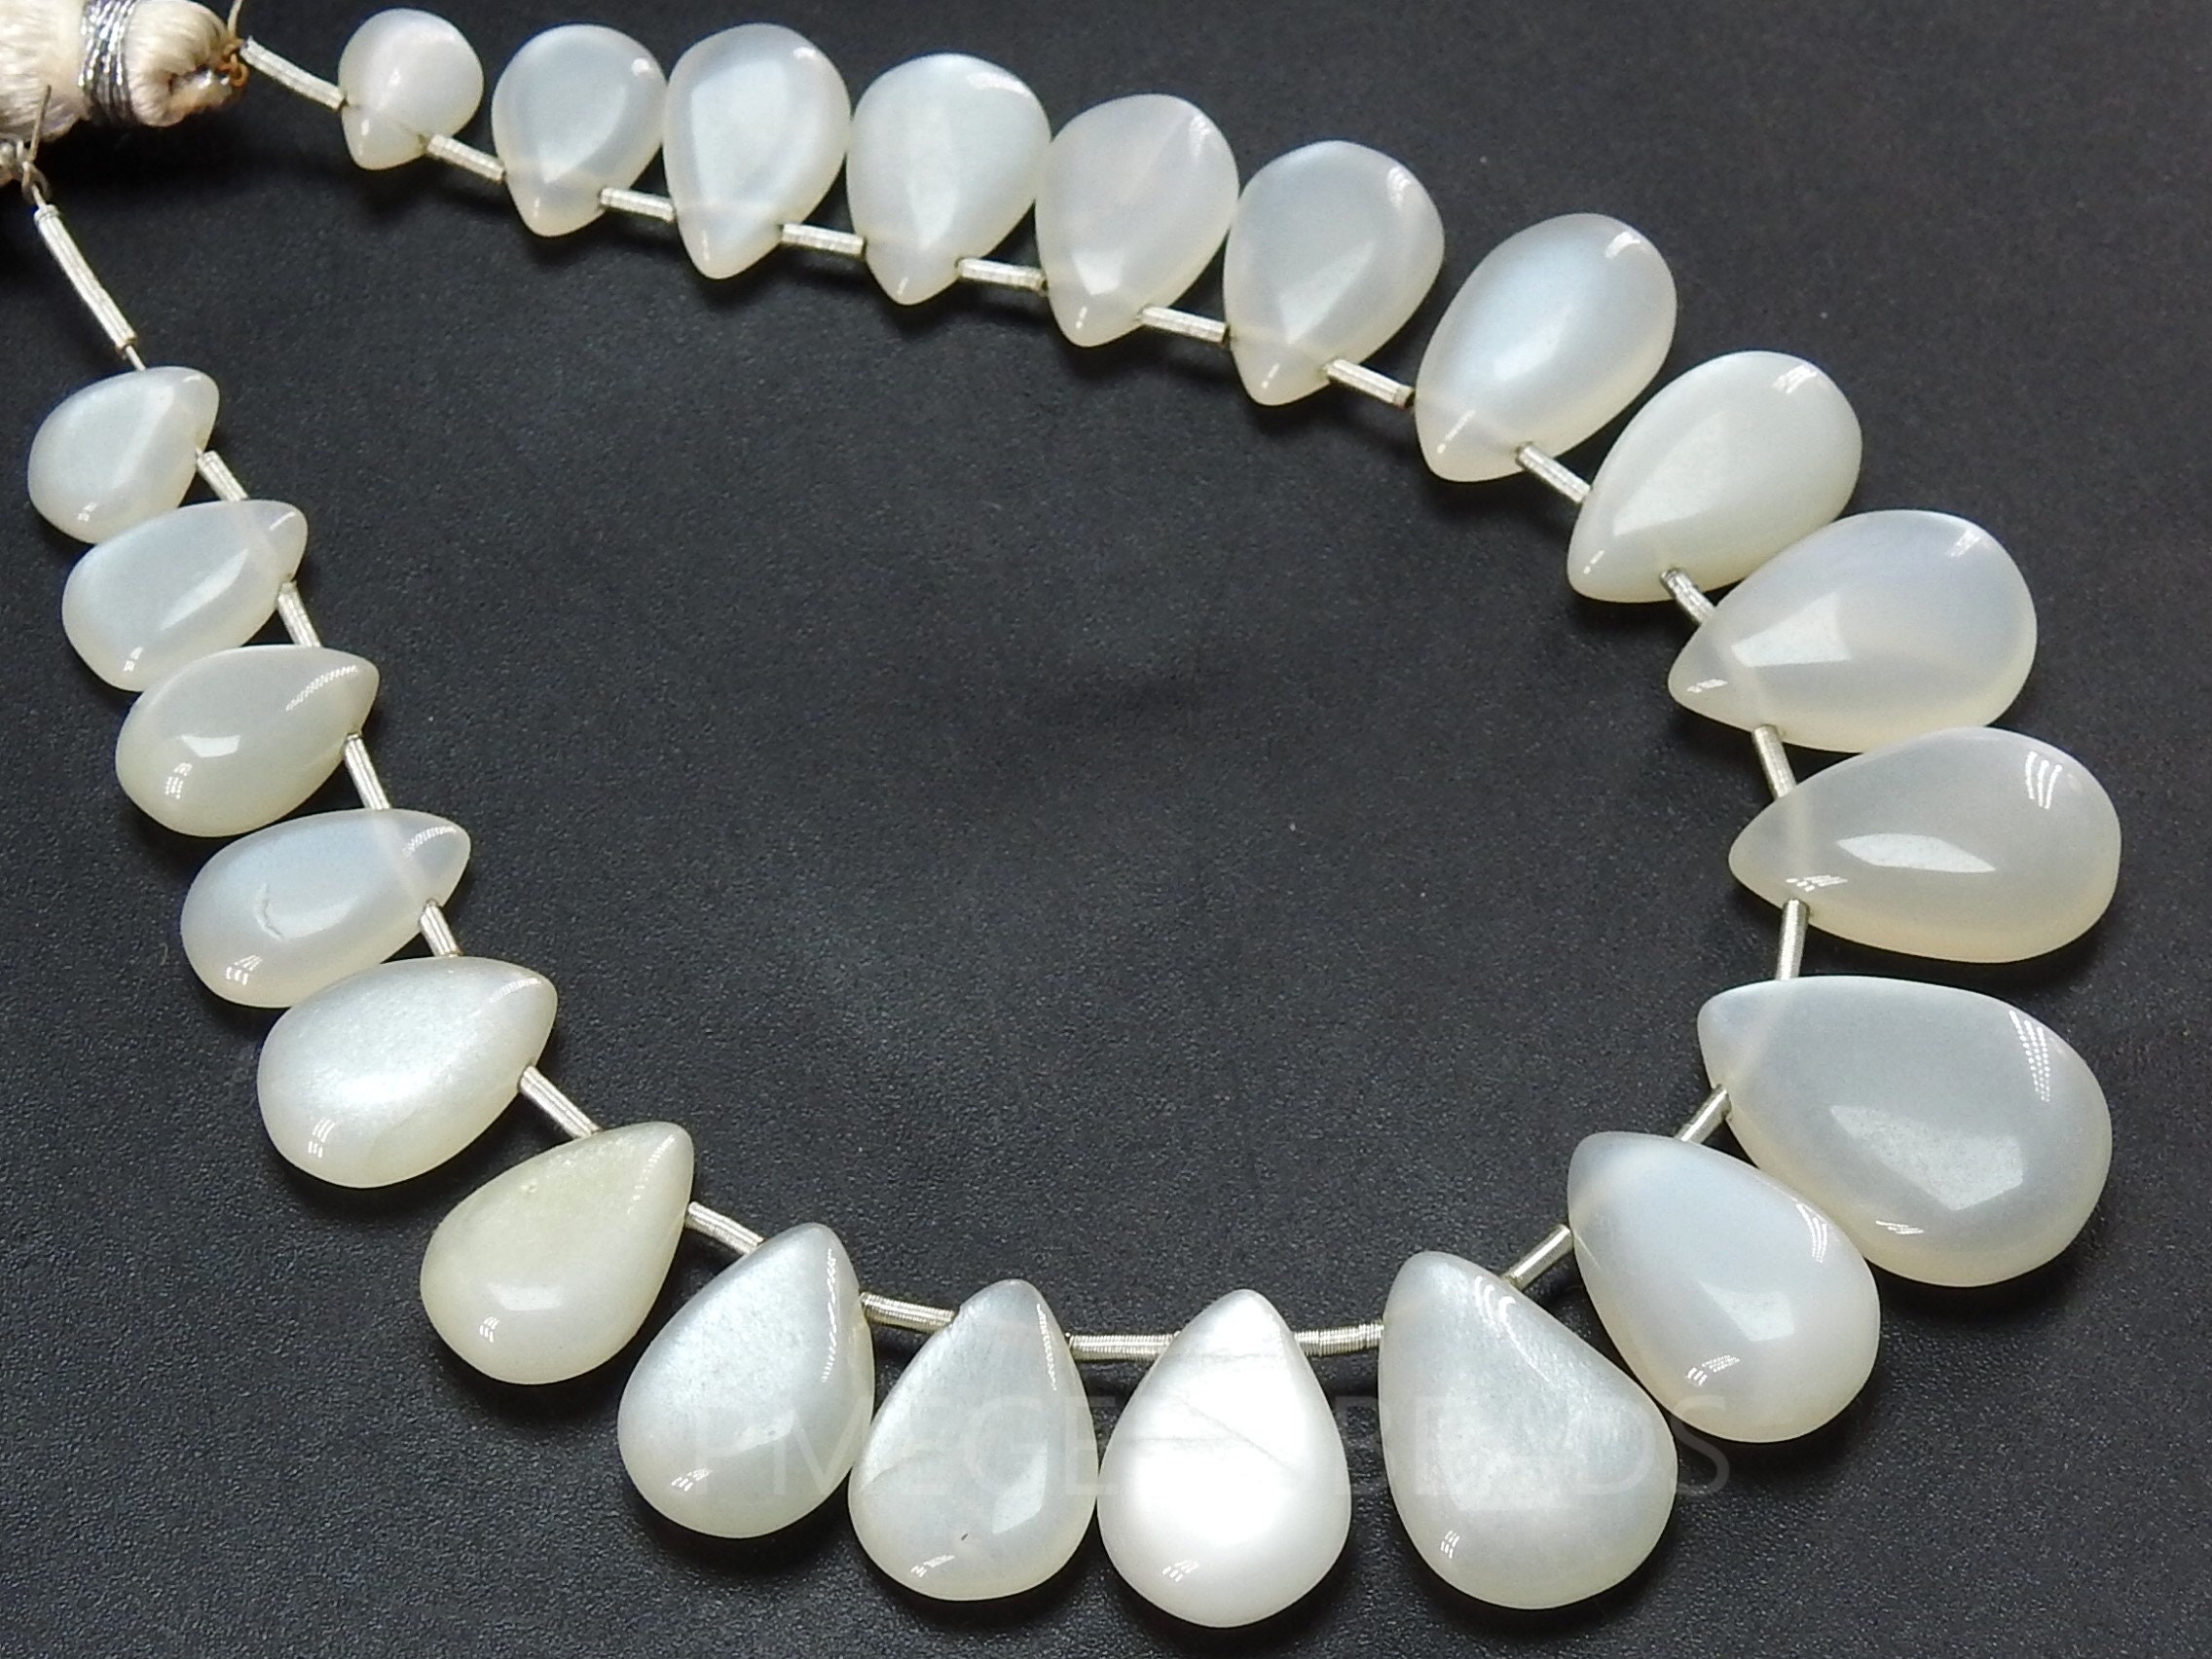 White Moonstone Smooth Teardrop,Drop,Loose Stone,Handmade Bead,For Making Jewelry,Wholesaler,Supplies,7Inchs 15X10To9X6MM Approx,PME-BR2 | Save 33% - Rajasthan Living 12